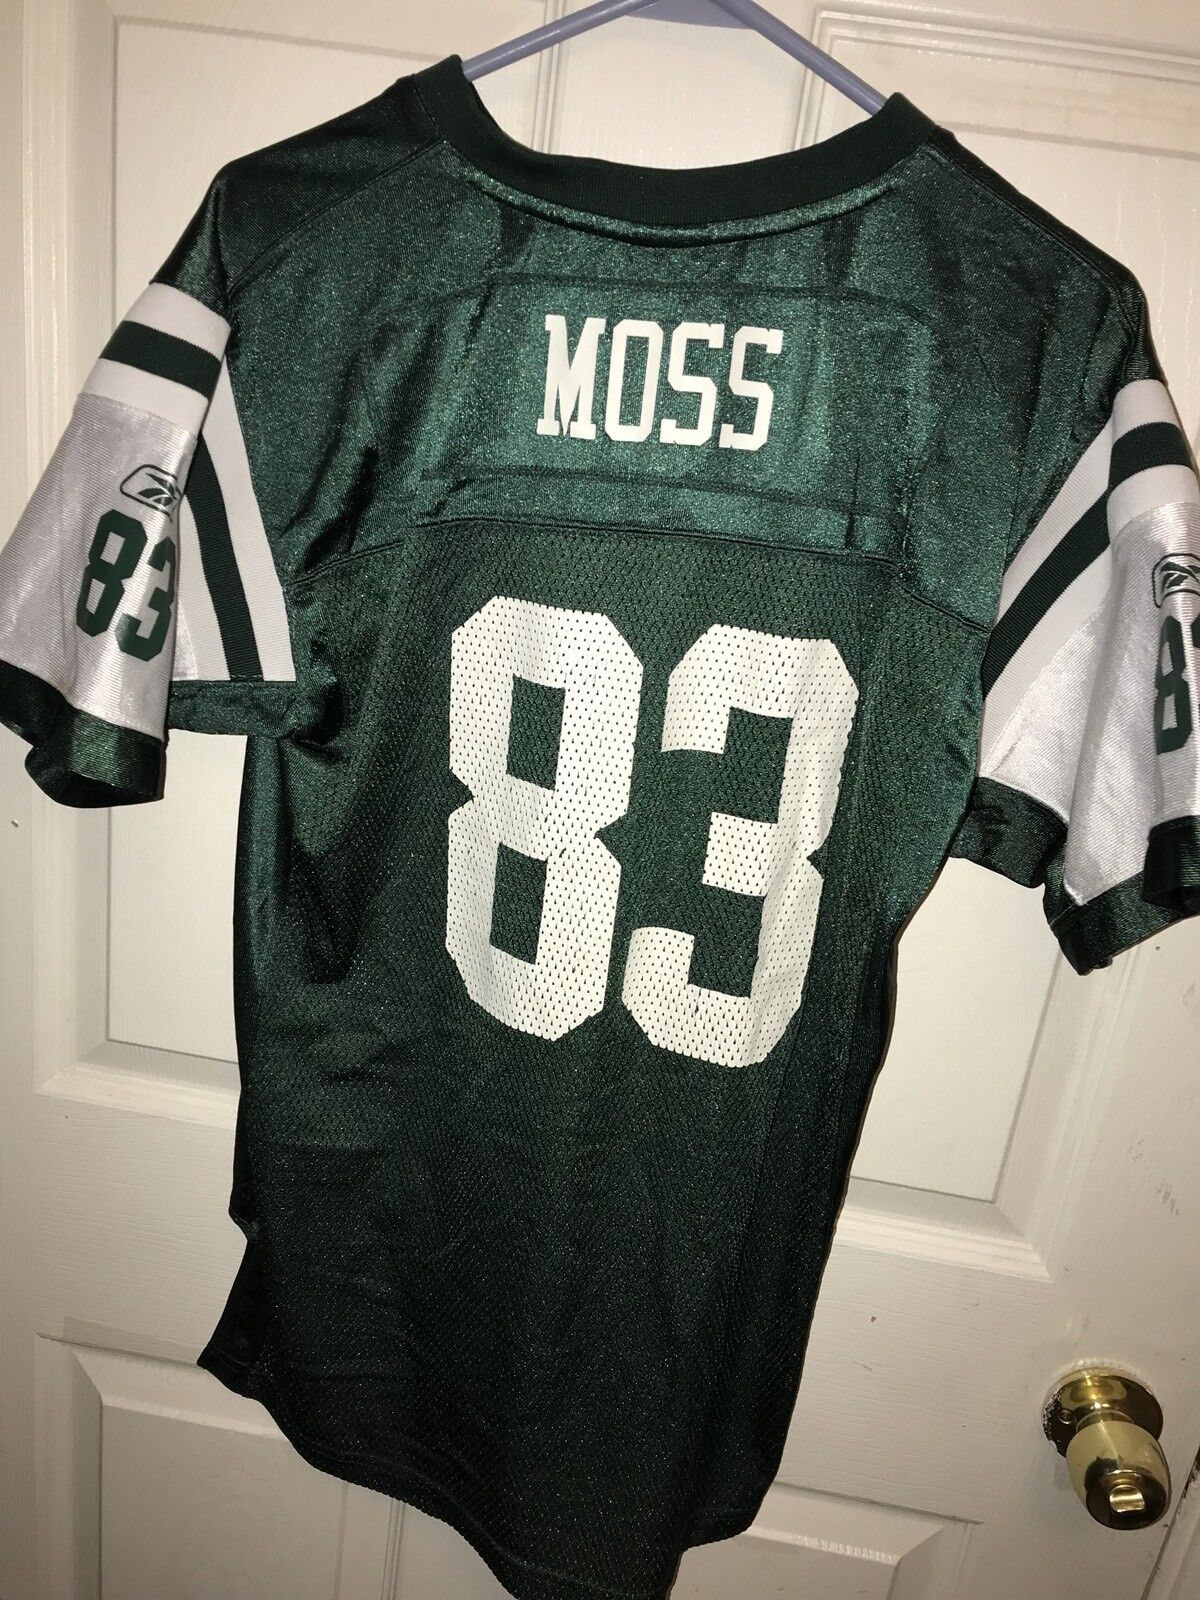 NEW YORK JETS #83 MOSS NFL FOOTBALL JERSEY YOUTH XL 18-20